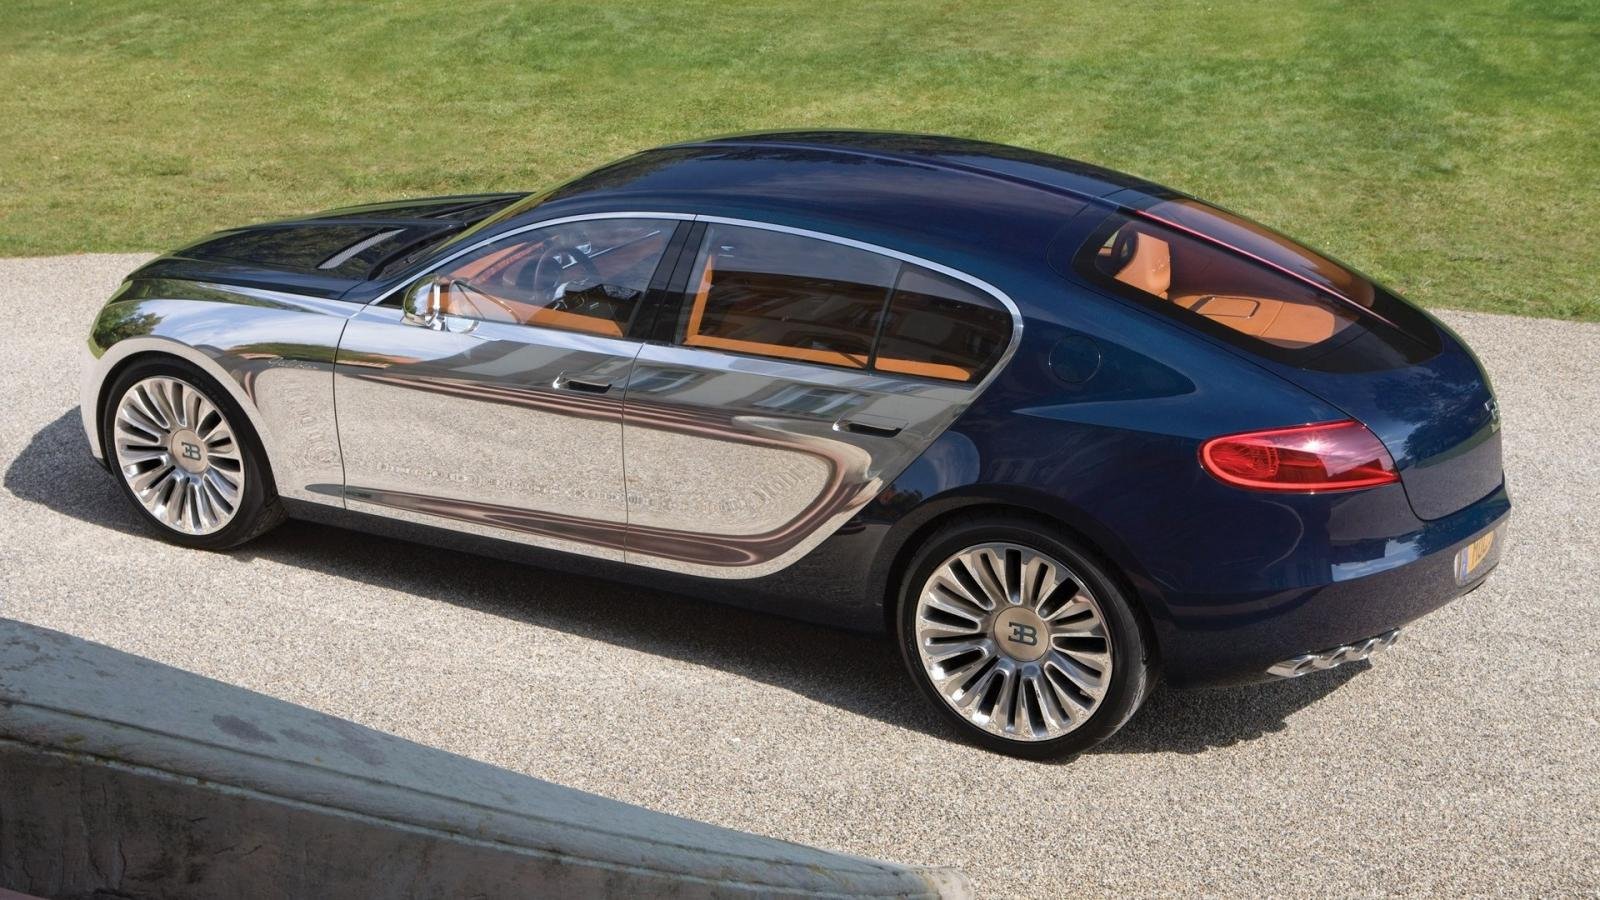 Bugatti Galibier - What Bugatti's answer to Rolls-Royce would've been